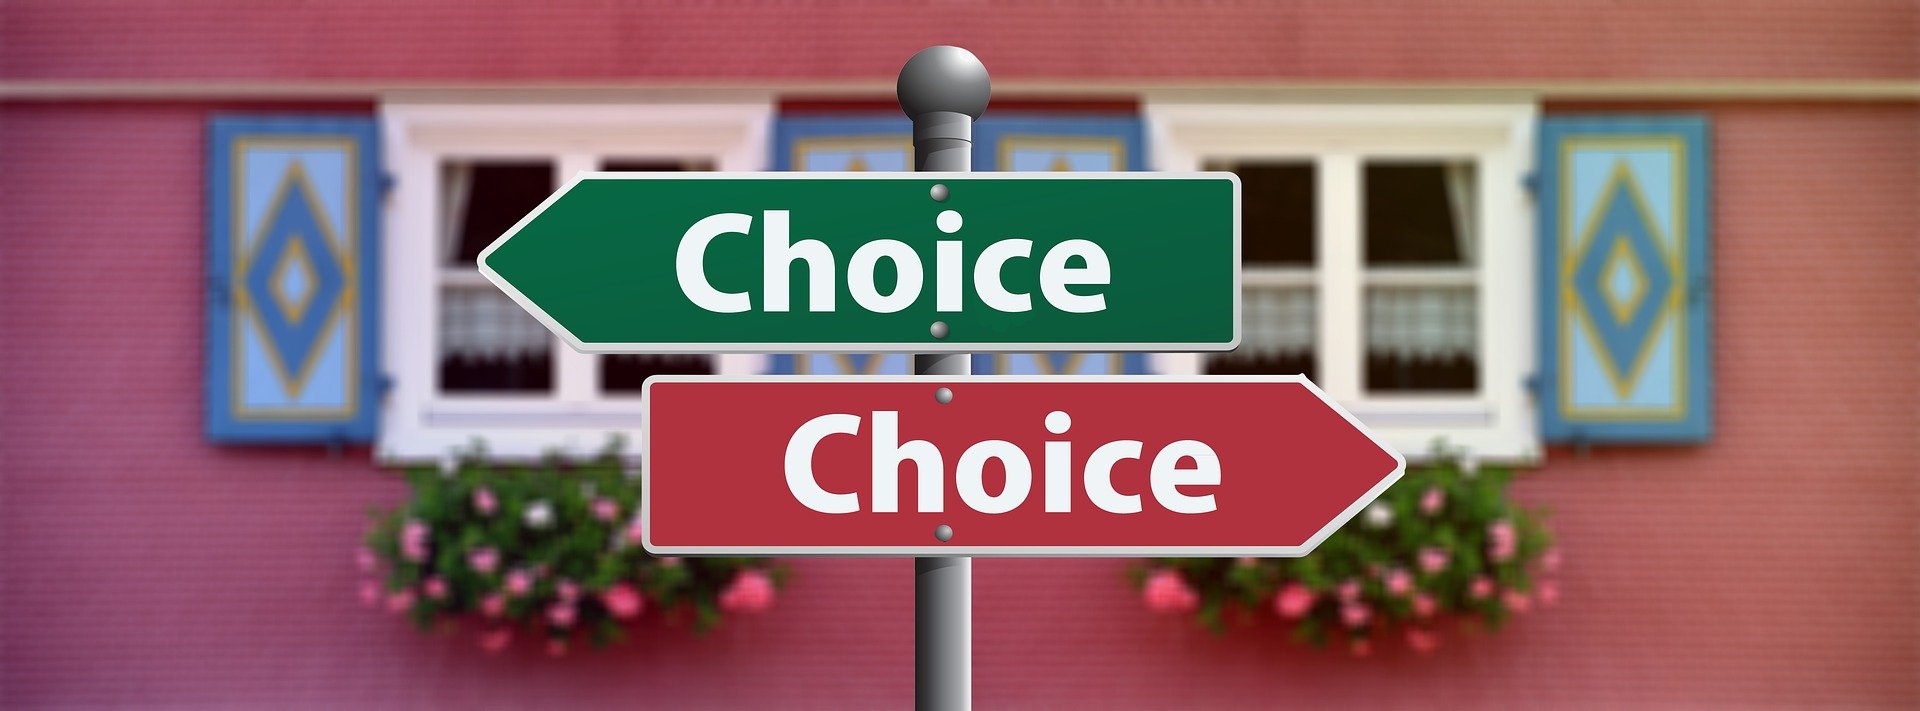 choice images